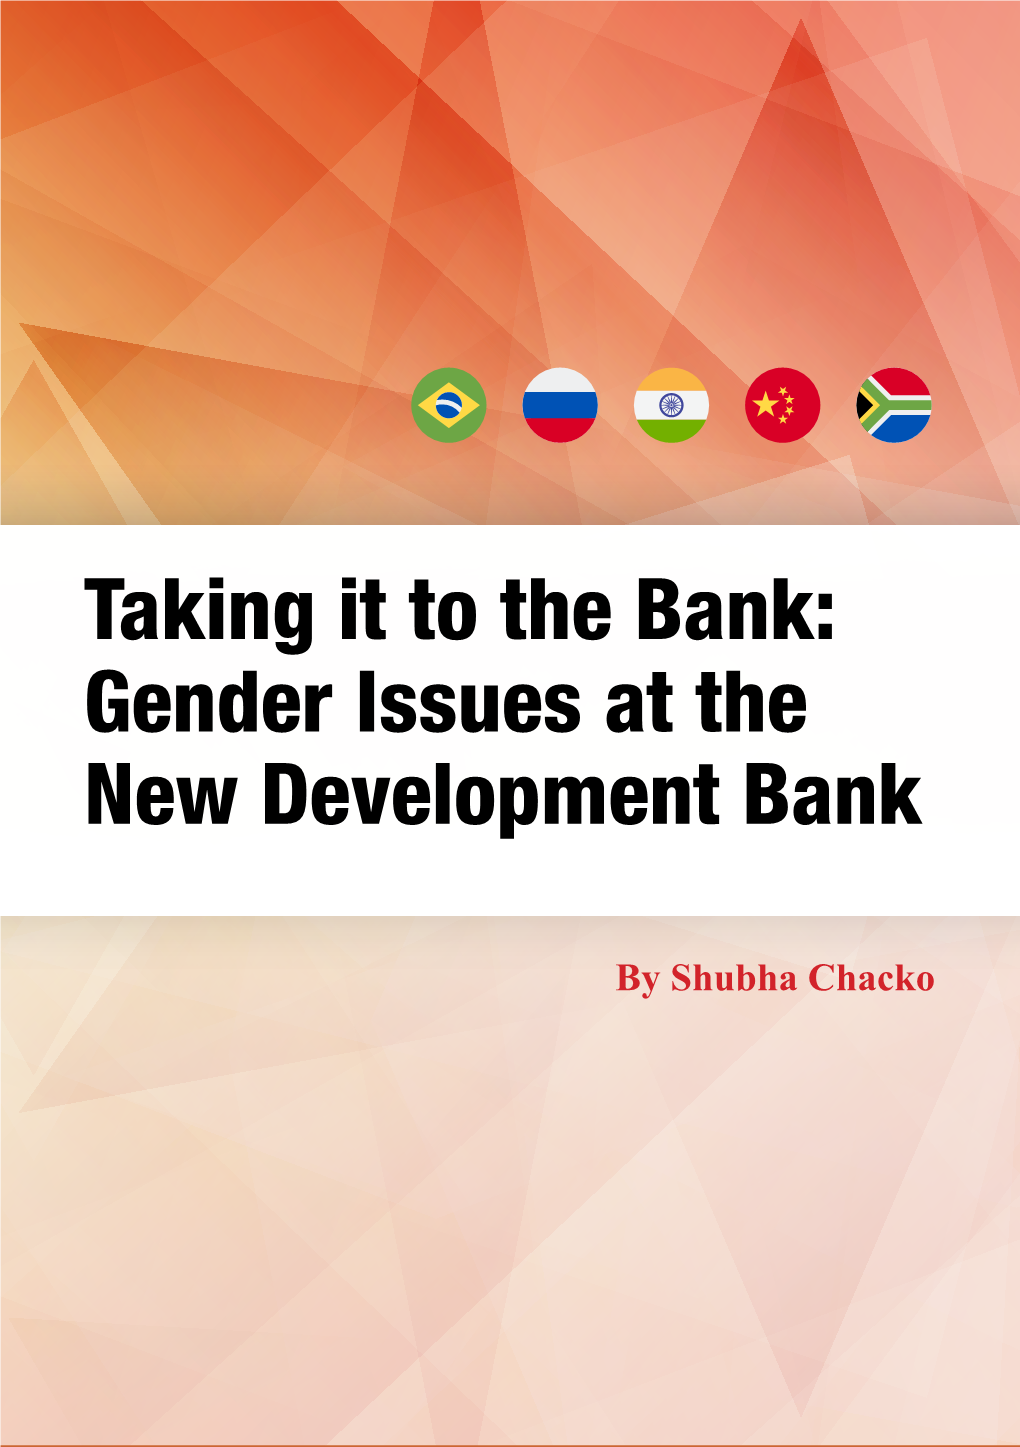 Taking It to the Bank: Gender Issues at the New Development Bank